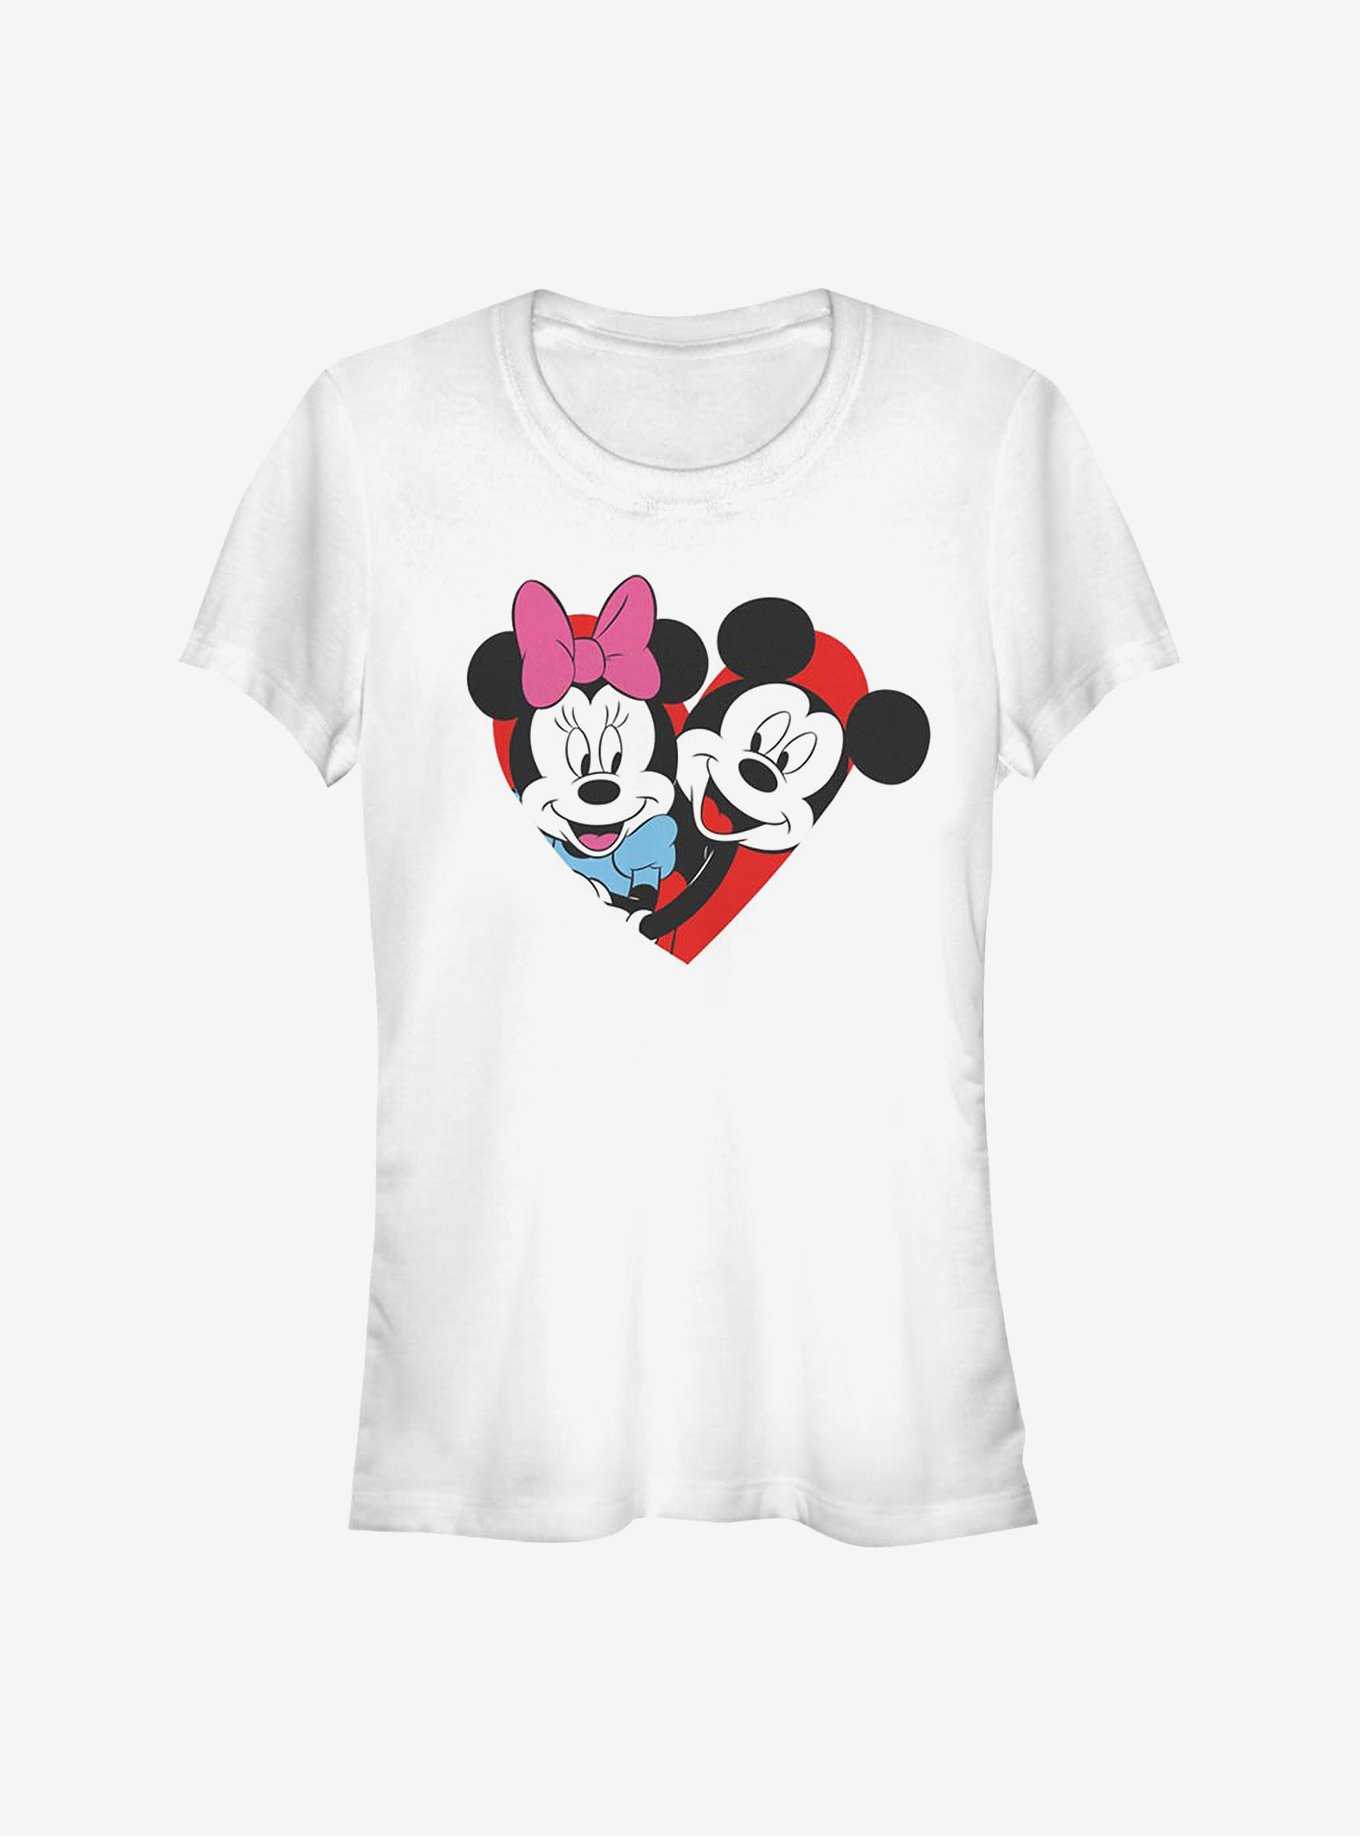 Disney Mickey Mouse & Minnie Mouse Heart Girls T-Shirt